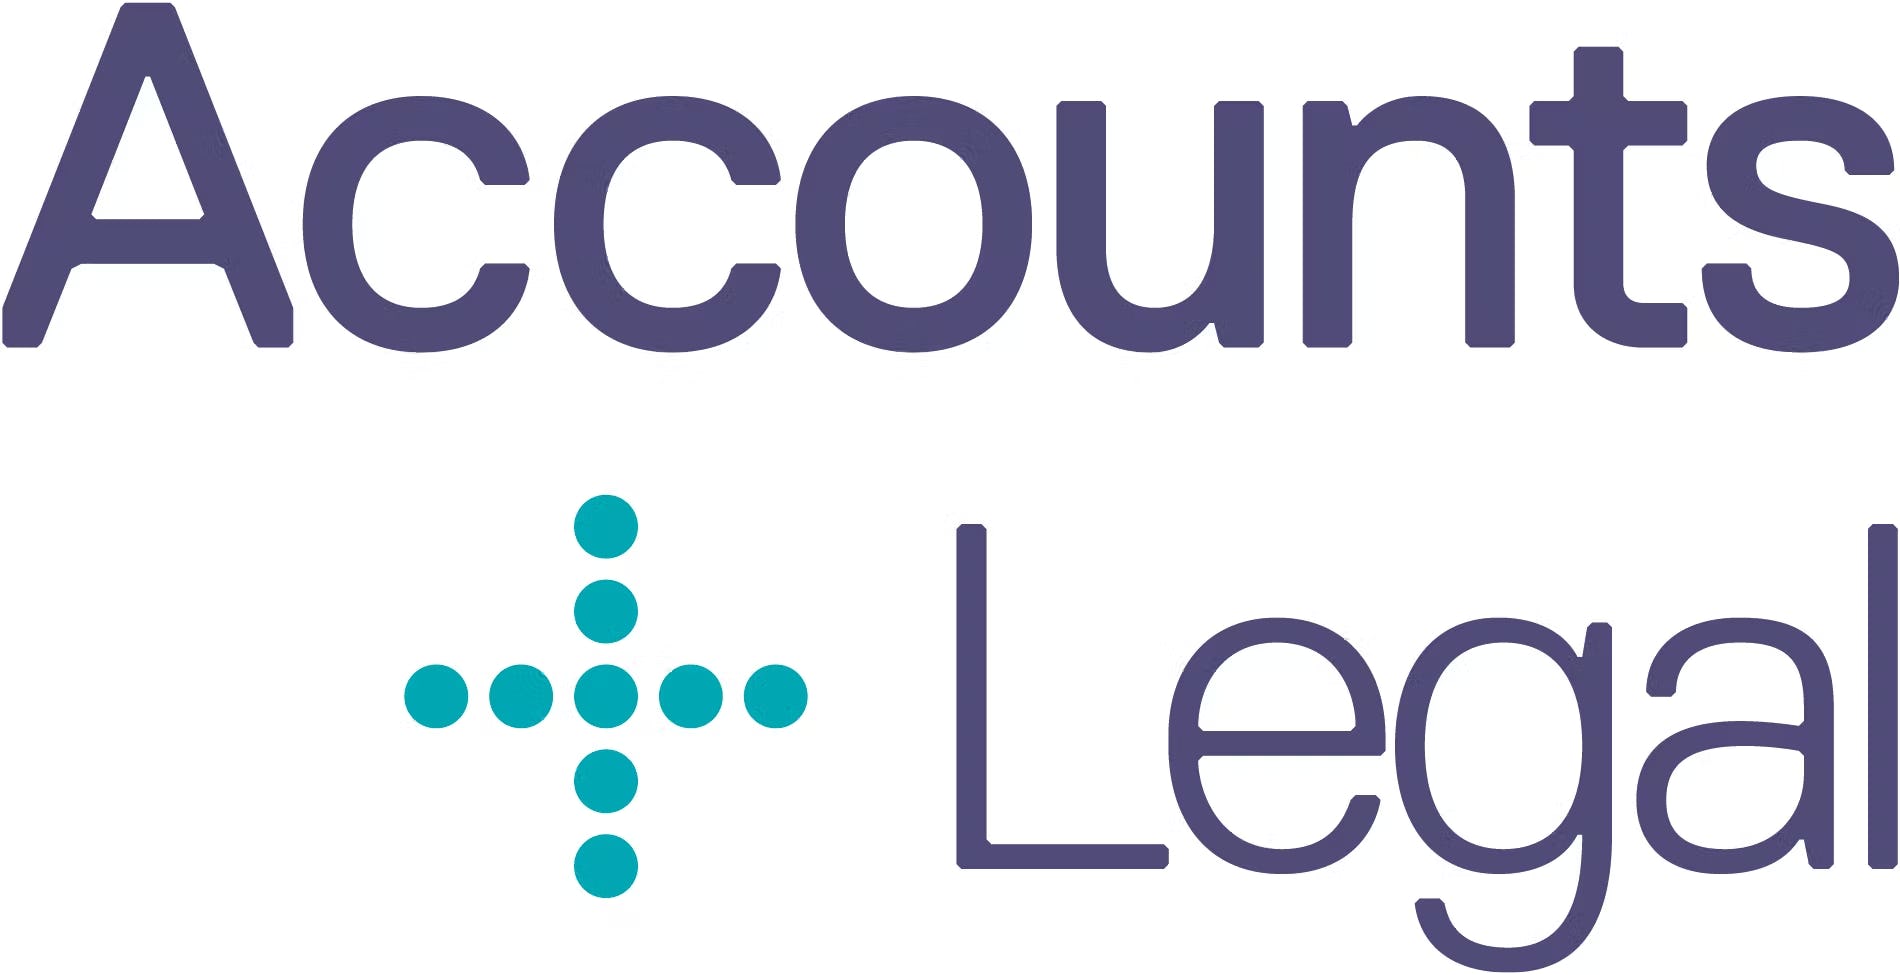 Accounts and legal